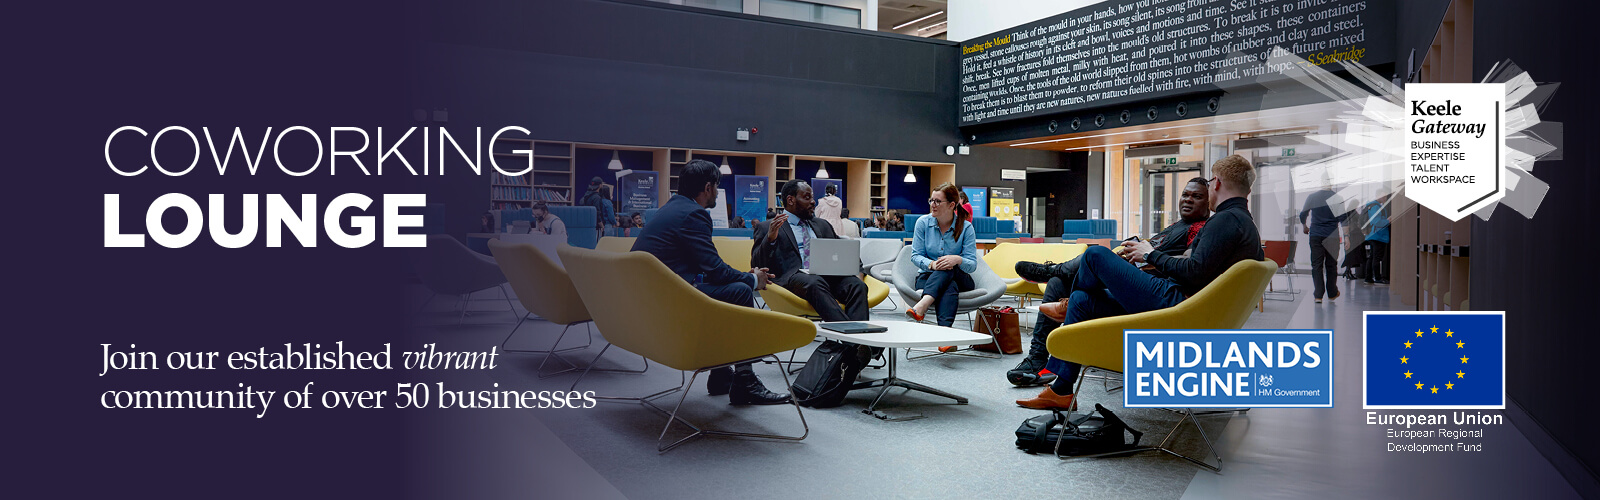 Photograph of a group of people seated around a coffee table inside the atrium of Keele University's Smart Innovation Hub, text overlay reads 'Coworking lounge' Keele Gateway, Midlands Engine and ERDF logos